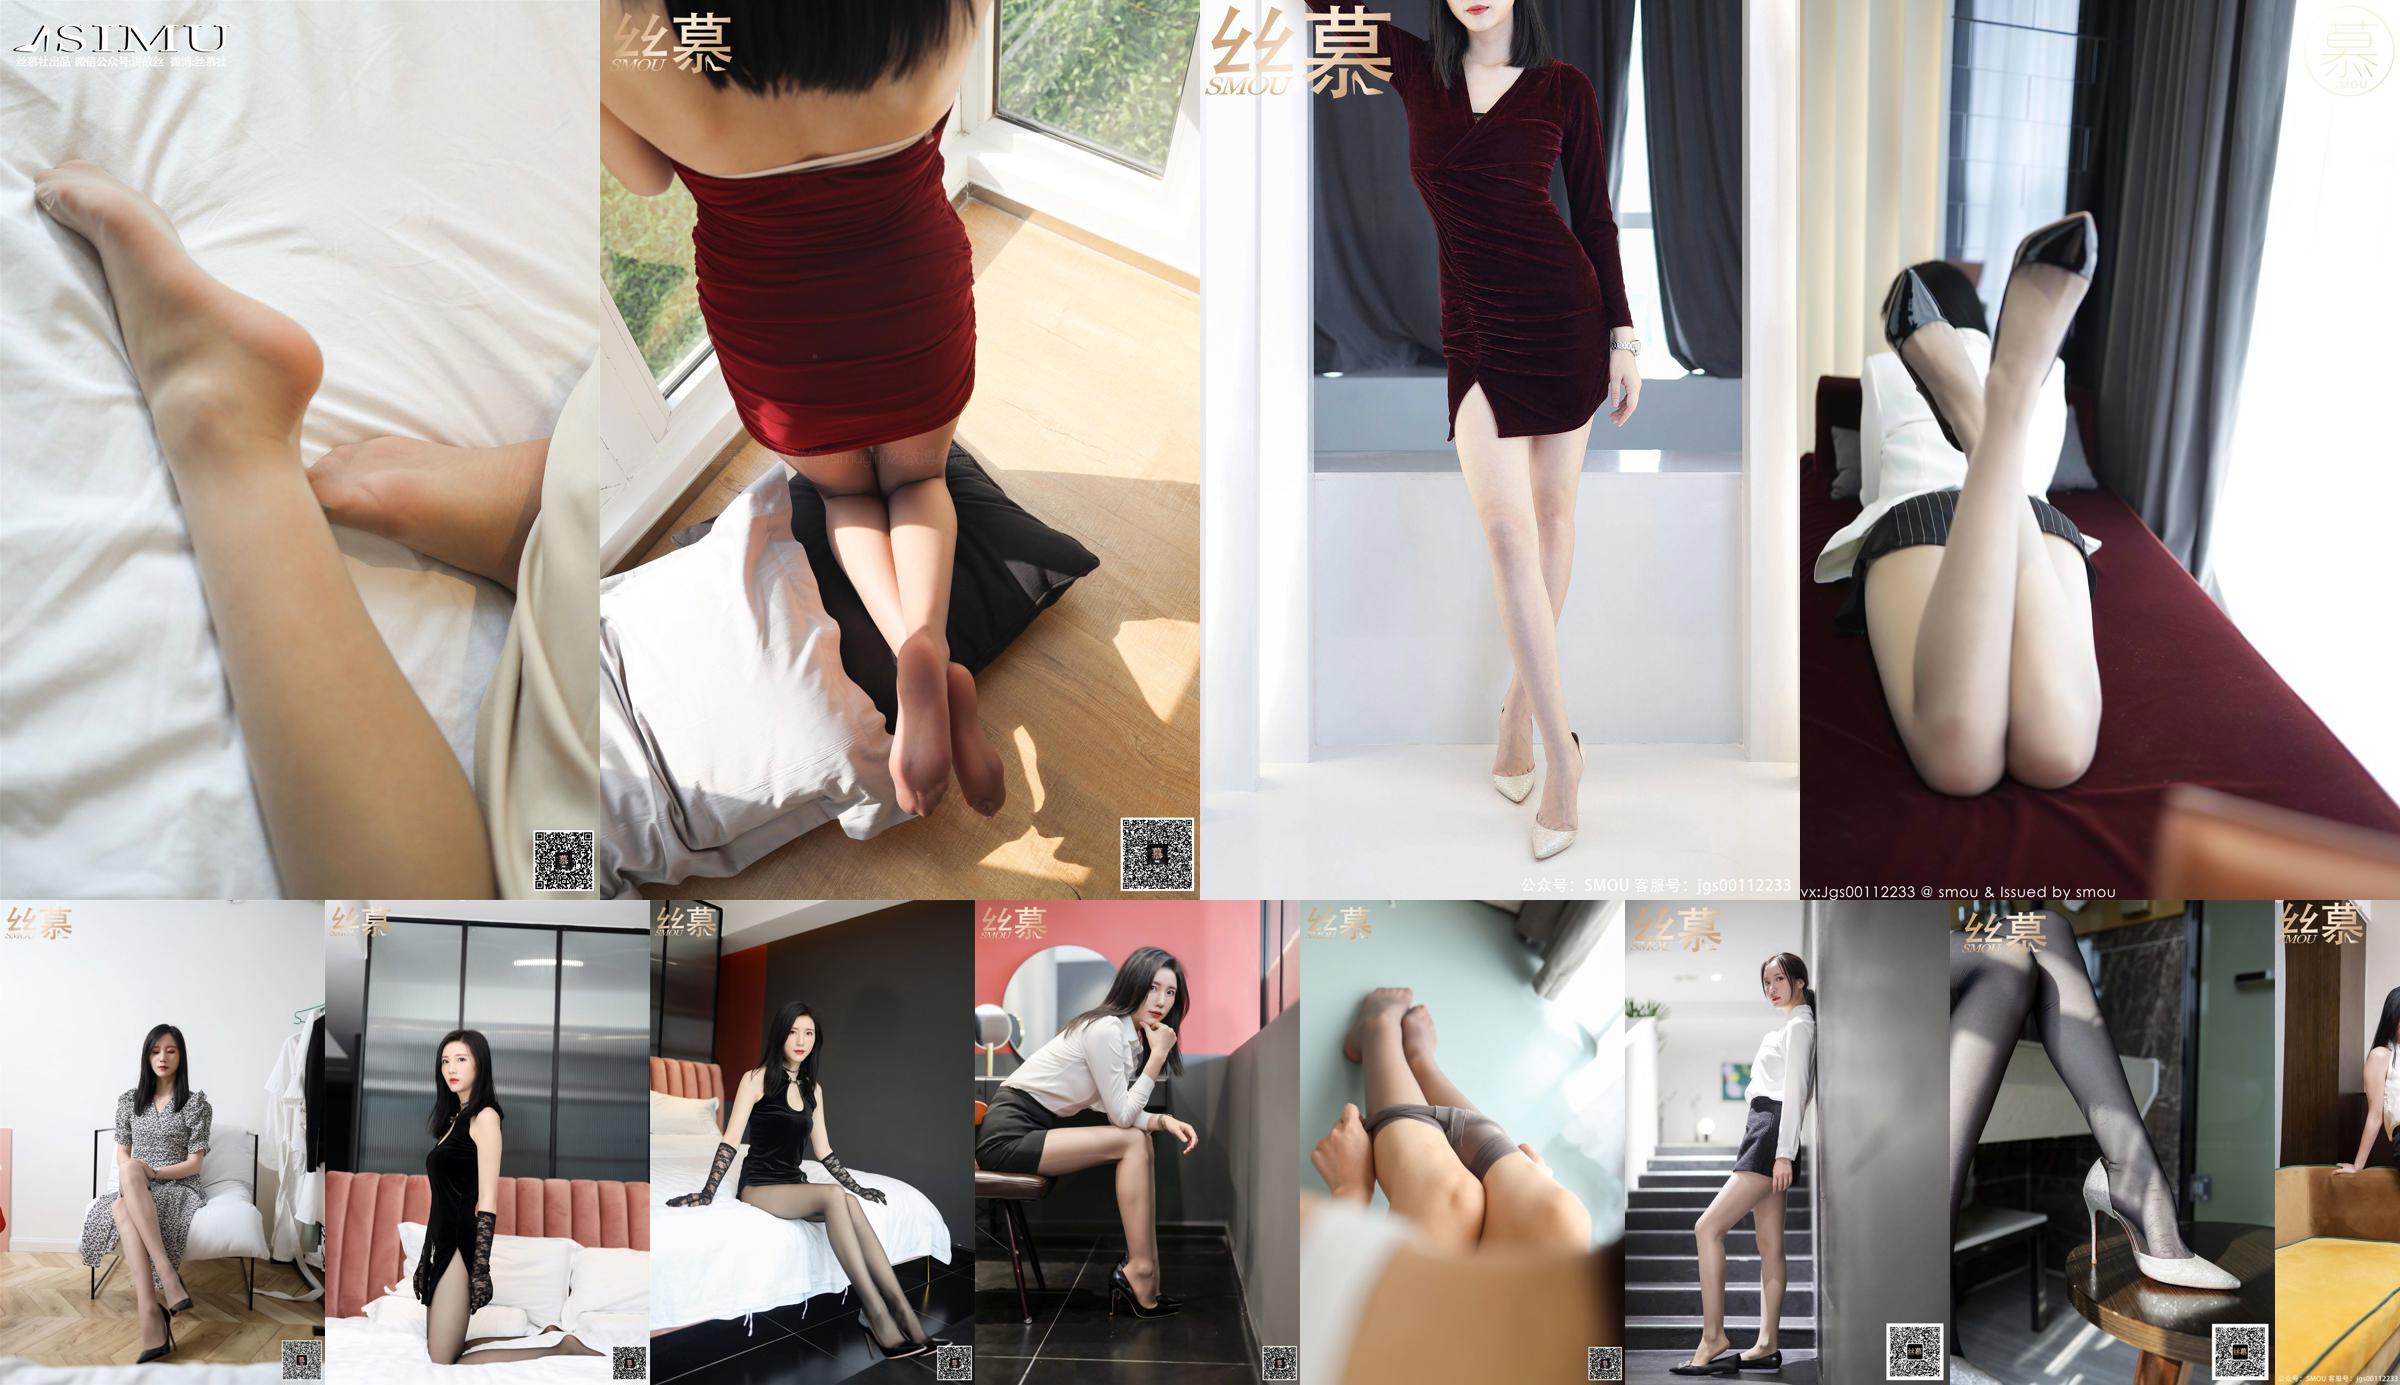 [Simu GIRL] Feature Collection TX089 Zining "The Goddess of Flat Shoes" No.3ec92c Page 1